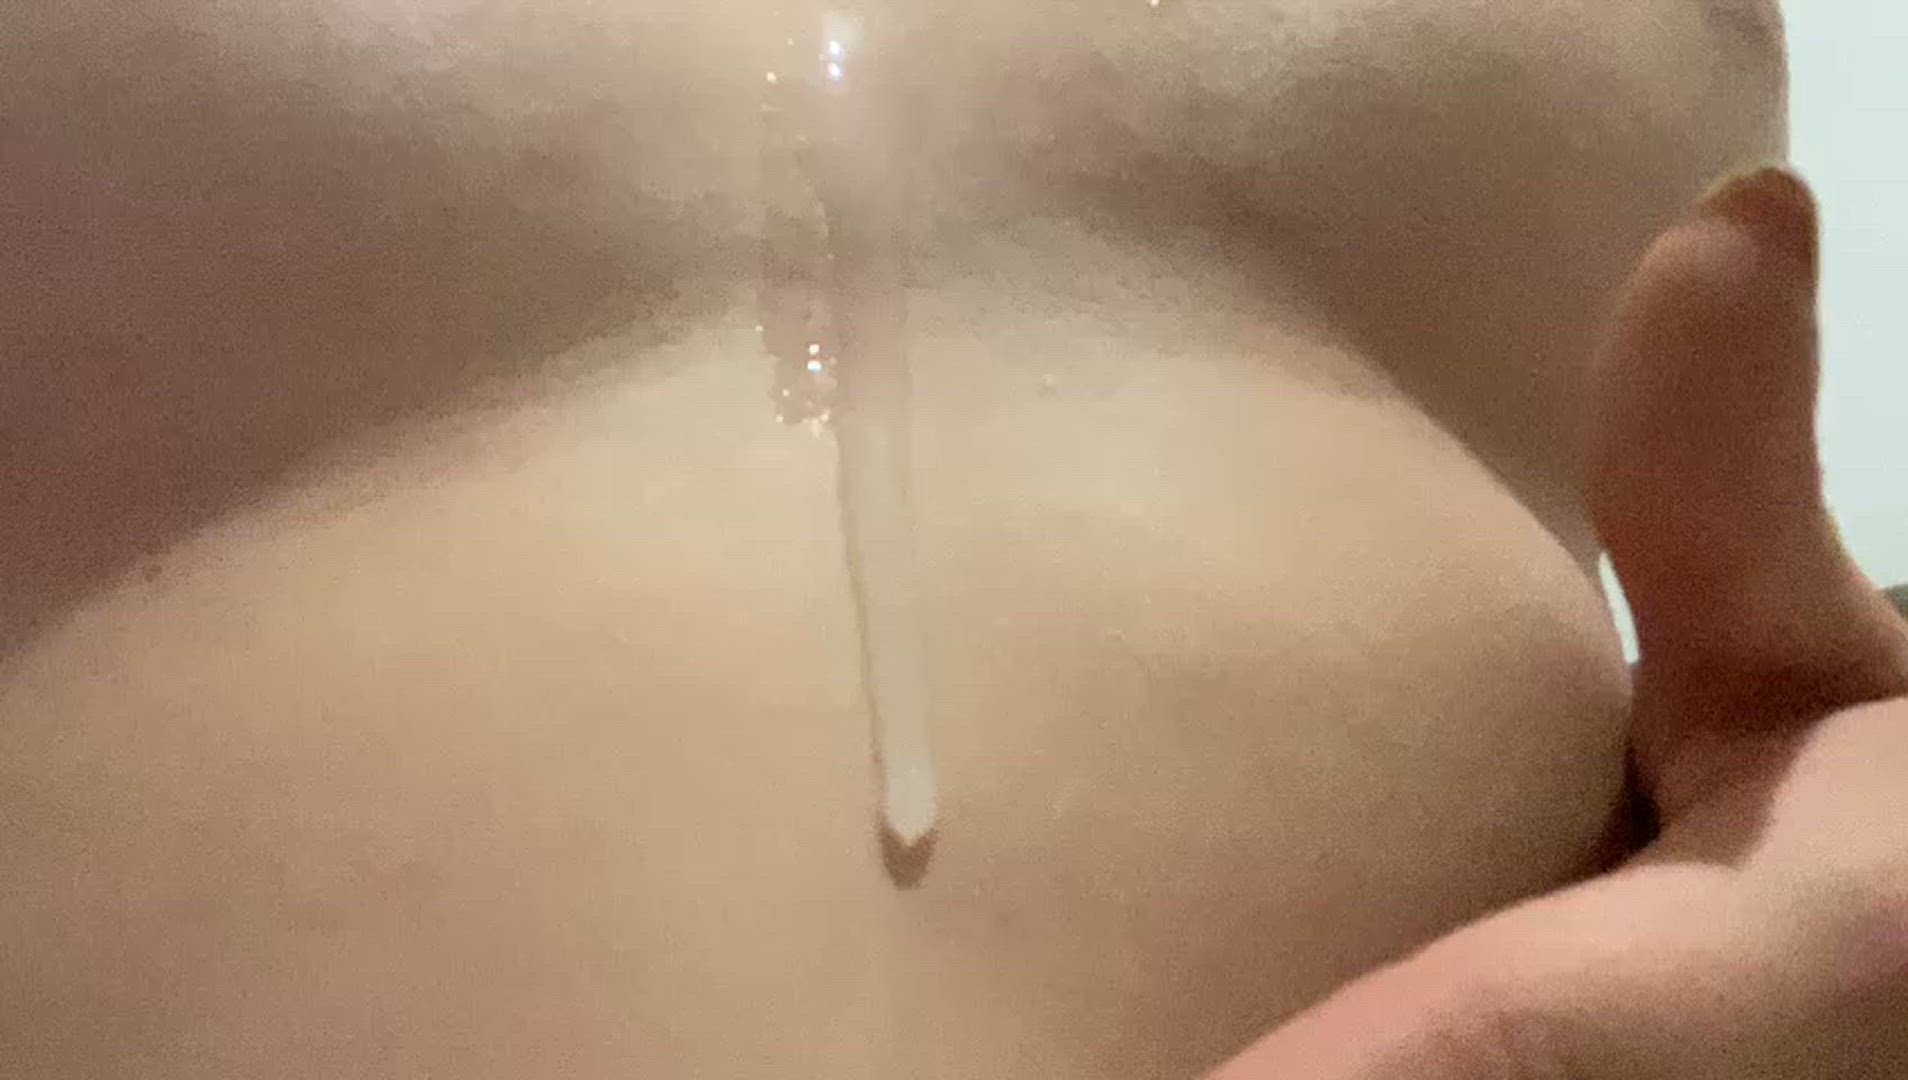 Cumshot porn video with onlyfans model linaryder <strong>@linacutiee</strong>